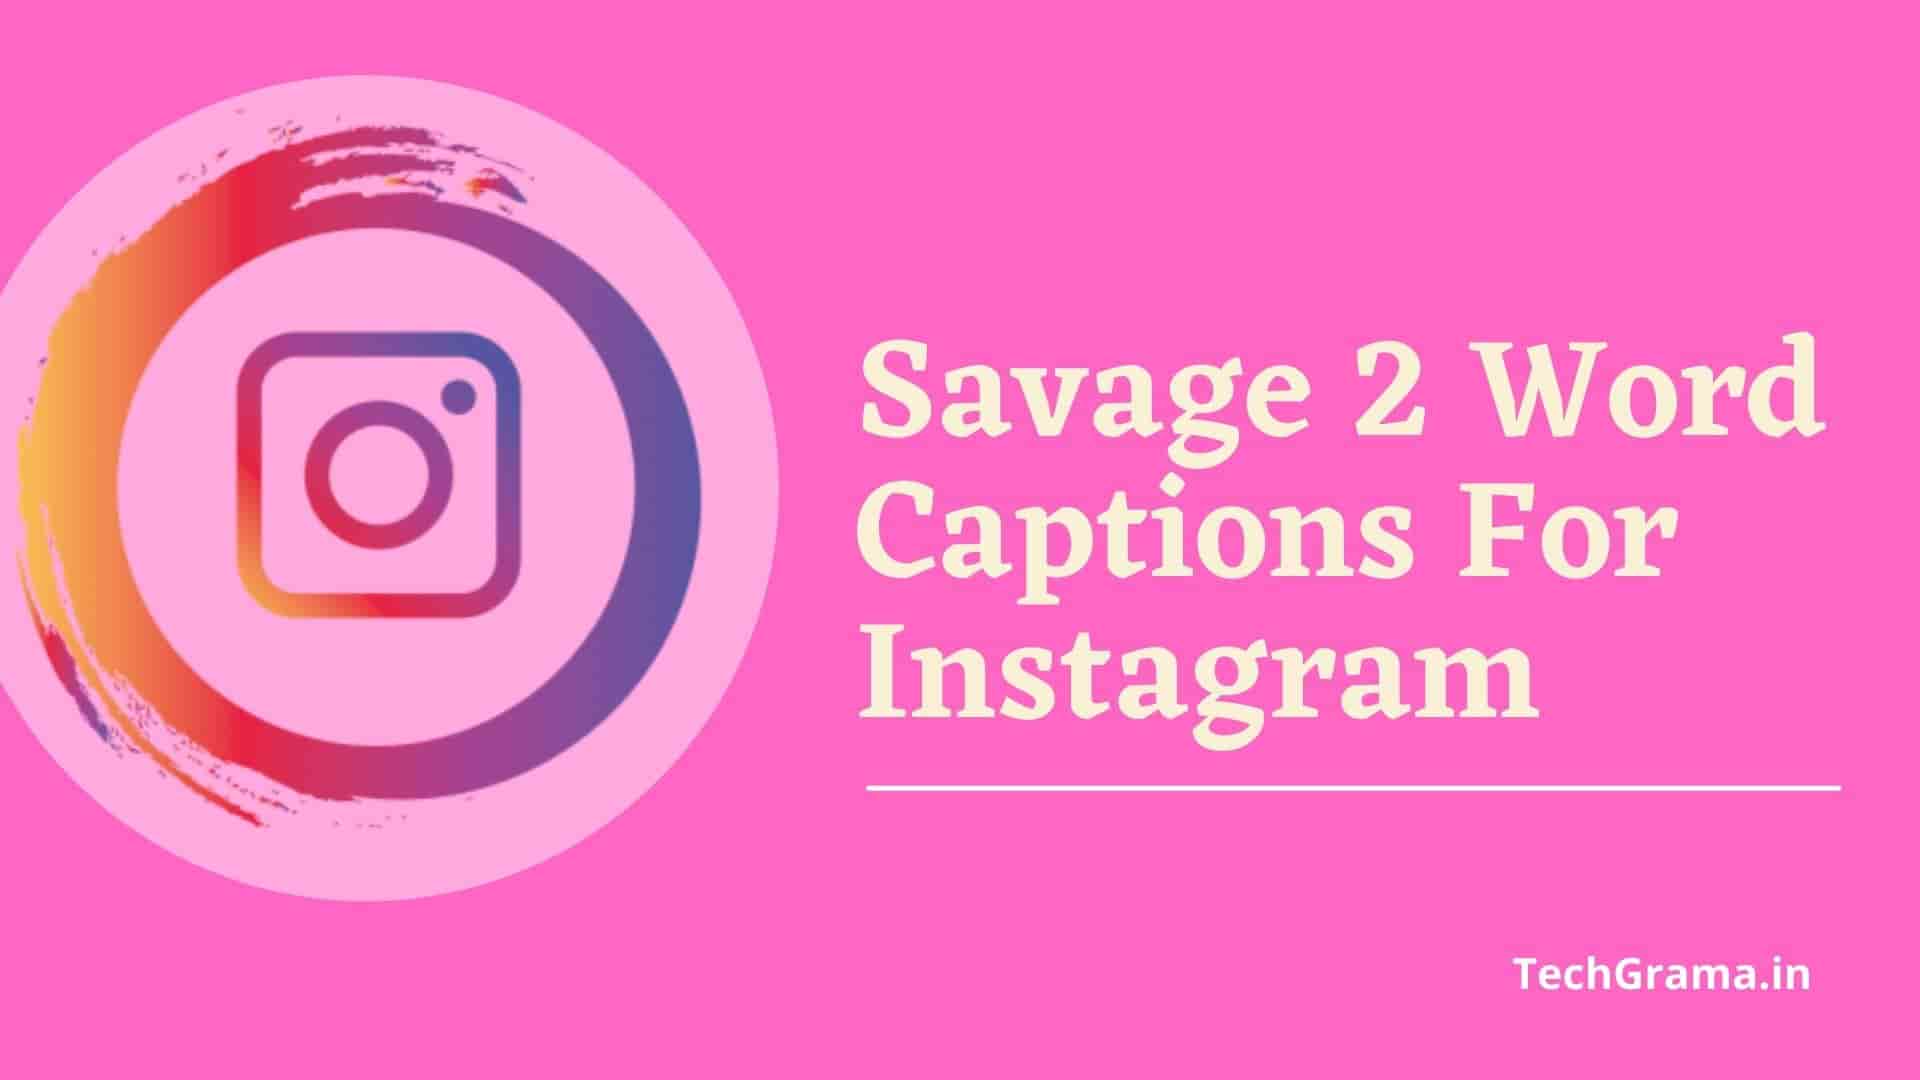 two word captions for instagram, 2 word captions for instagram, two word captions for instagram pictures, two word instagram captions, 2 word insta captions, instagram captions 2 words, best 2 word captions, 2 word sassy captions, two word captions for friends, savage 2 word captions for instagram, two word attitude captions for instagram, two word captions for instagram for boy and girl, two word hindi captions for instagram, one or two word captions for instagram